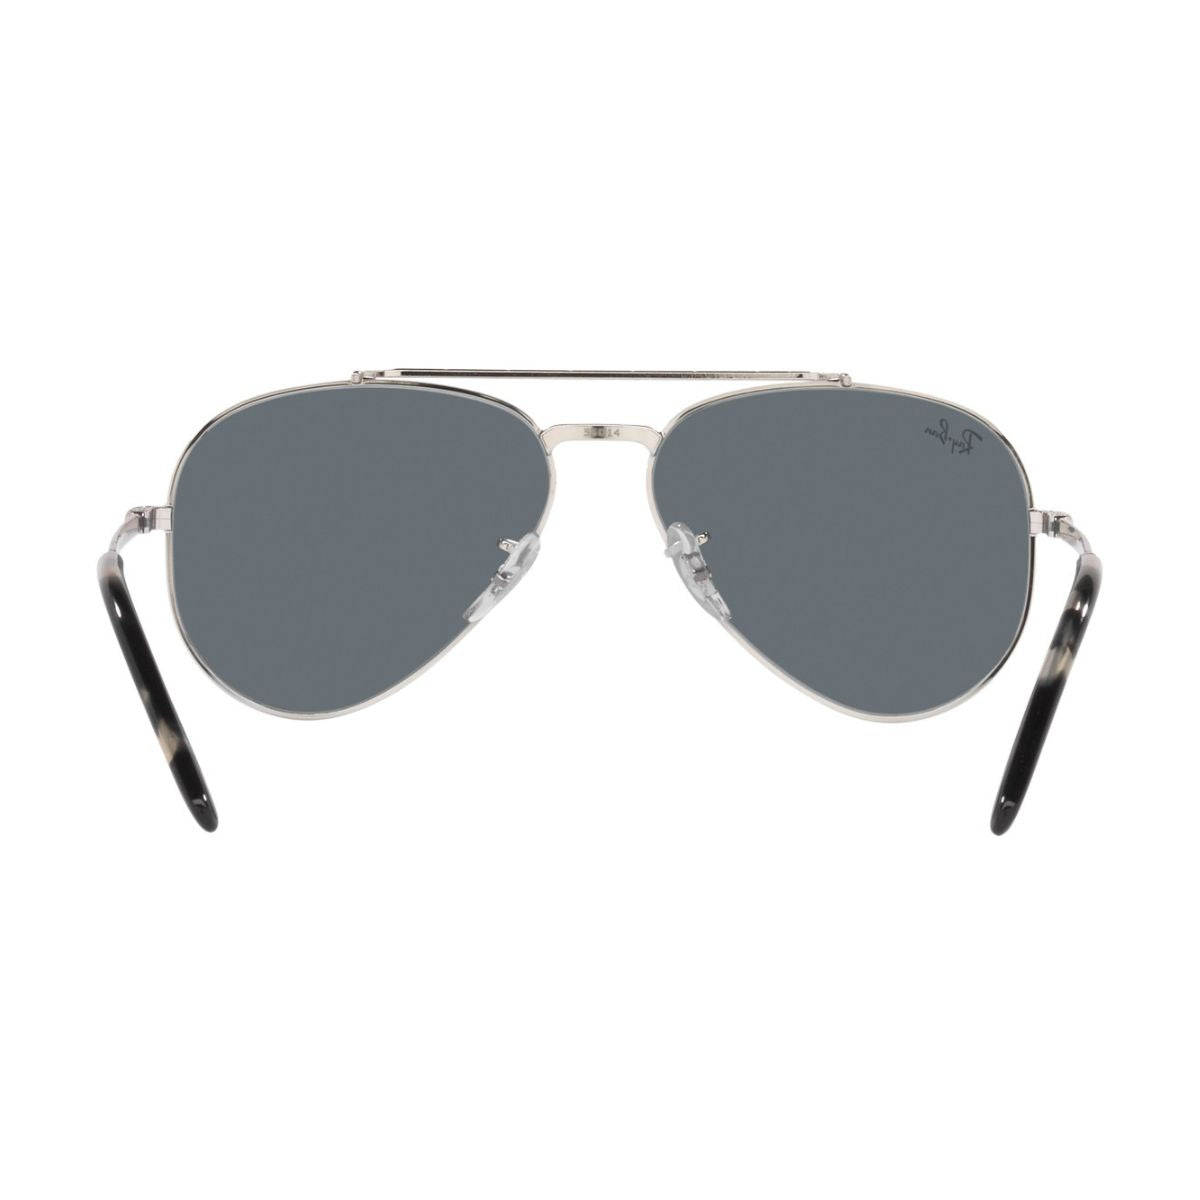 "Best Rayban 3025 003/R5 Sunglasses for Men's UV Safety Online At Optorium"